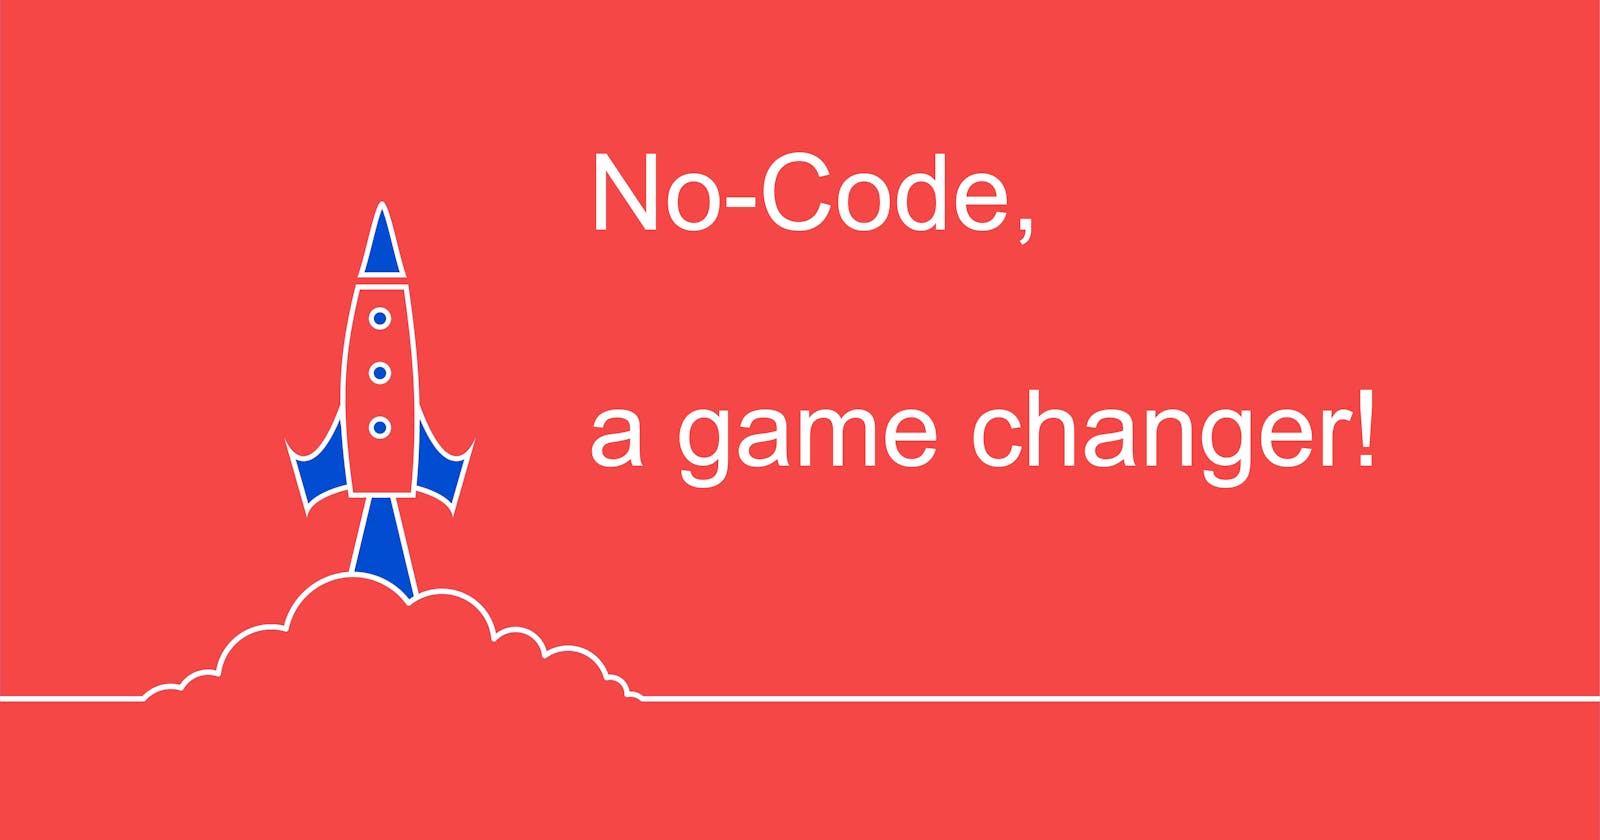 The advantages of no-code technology